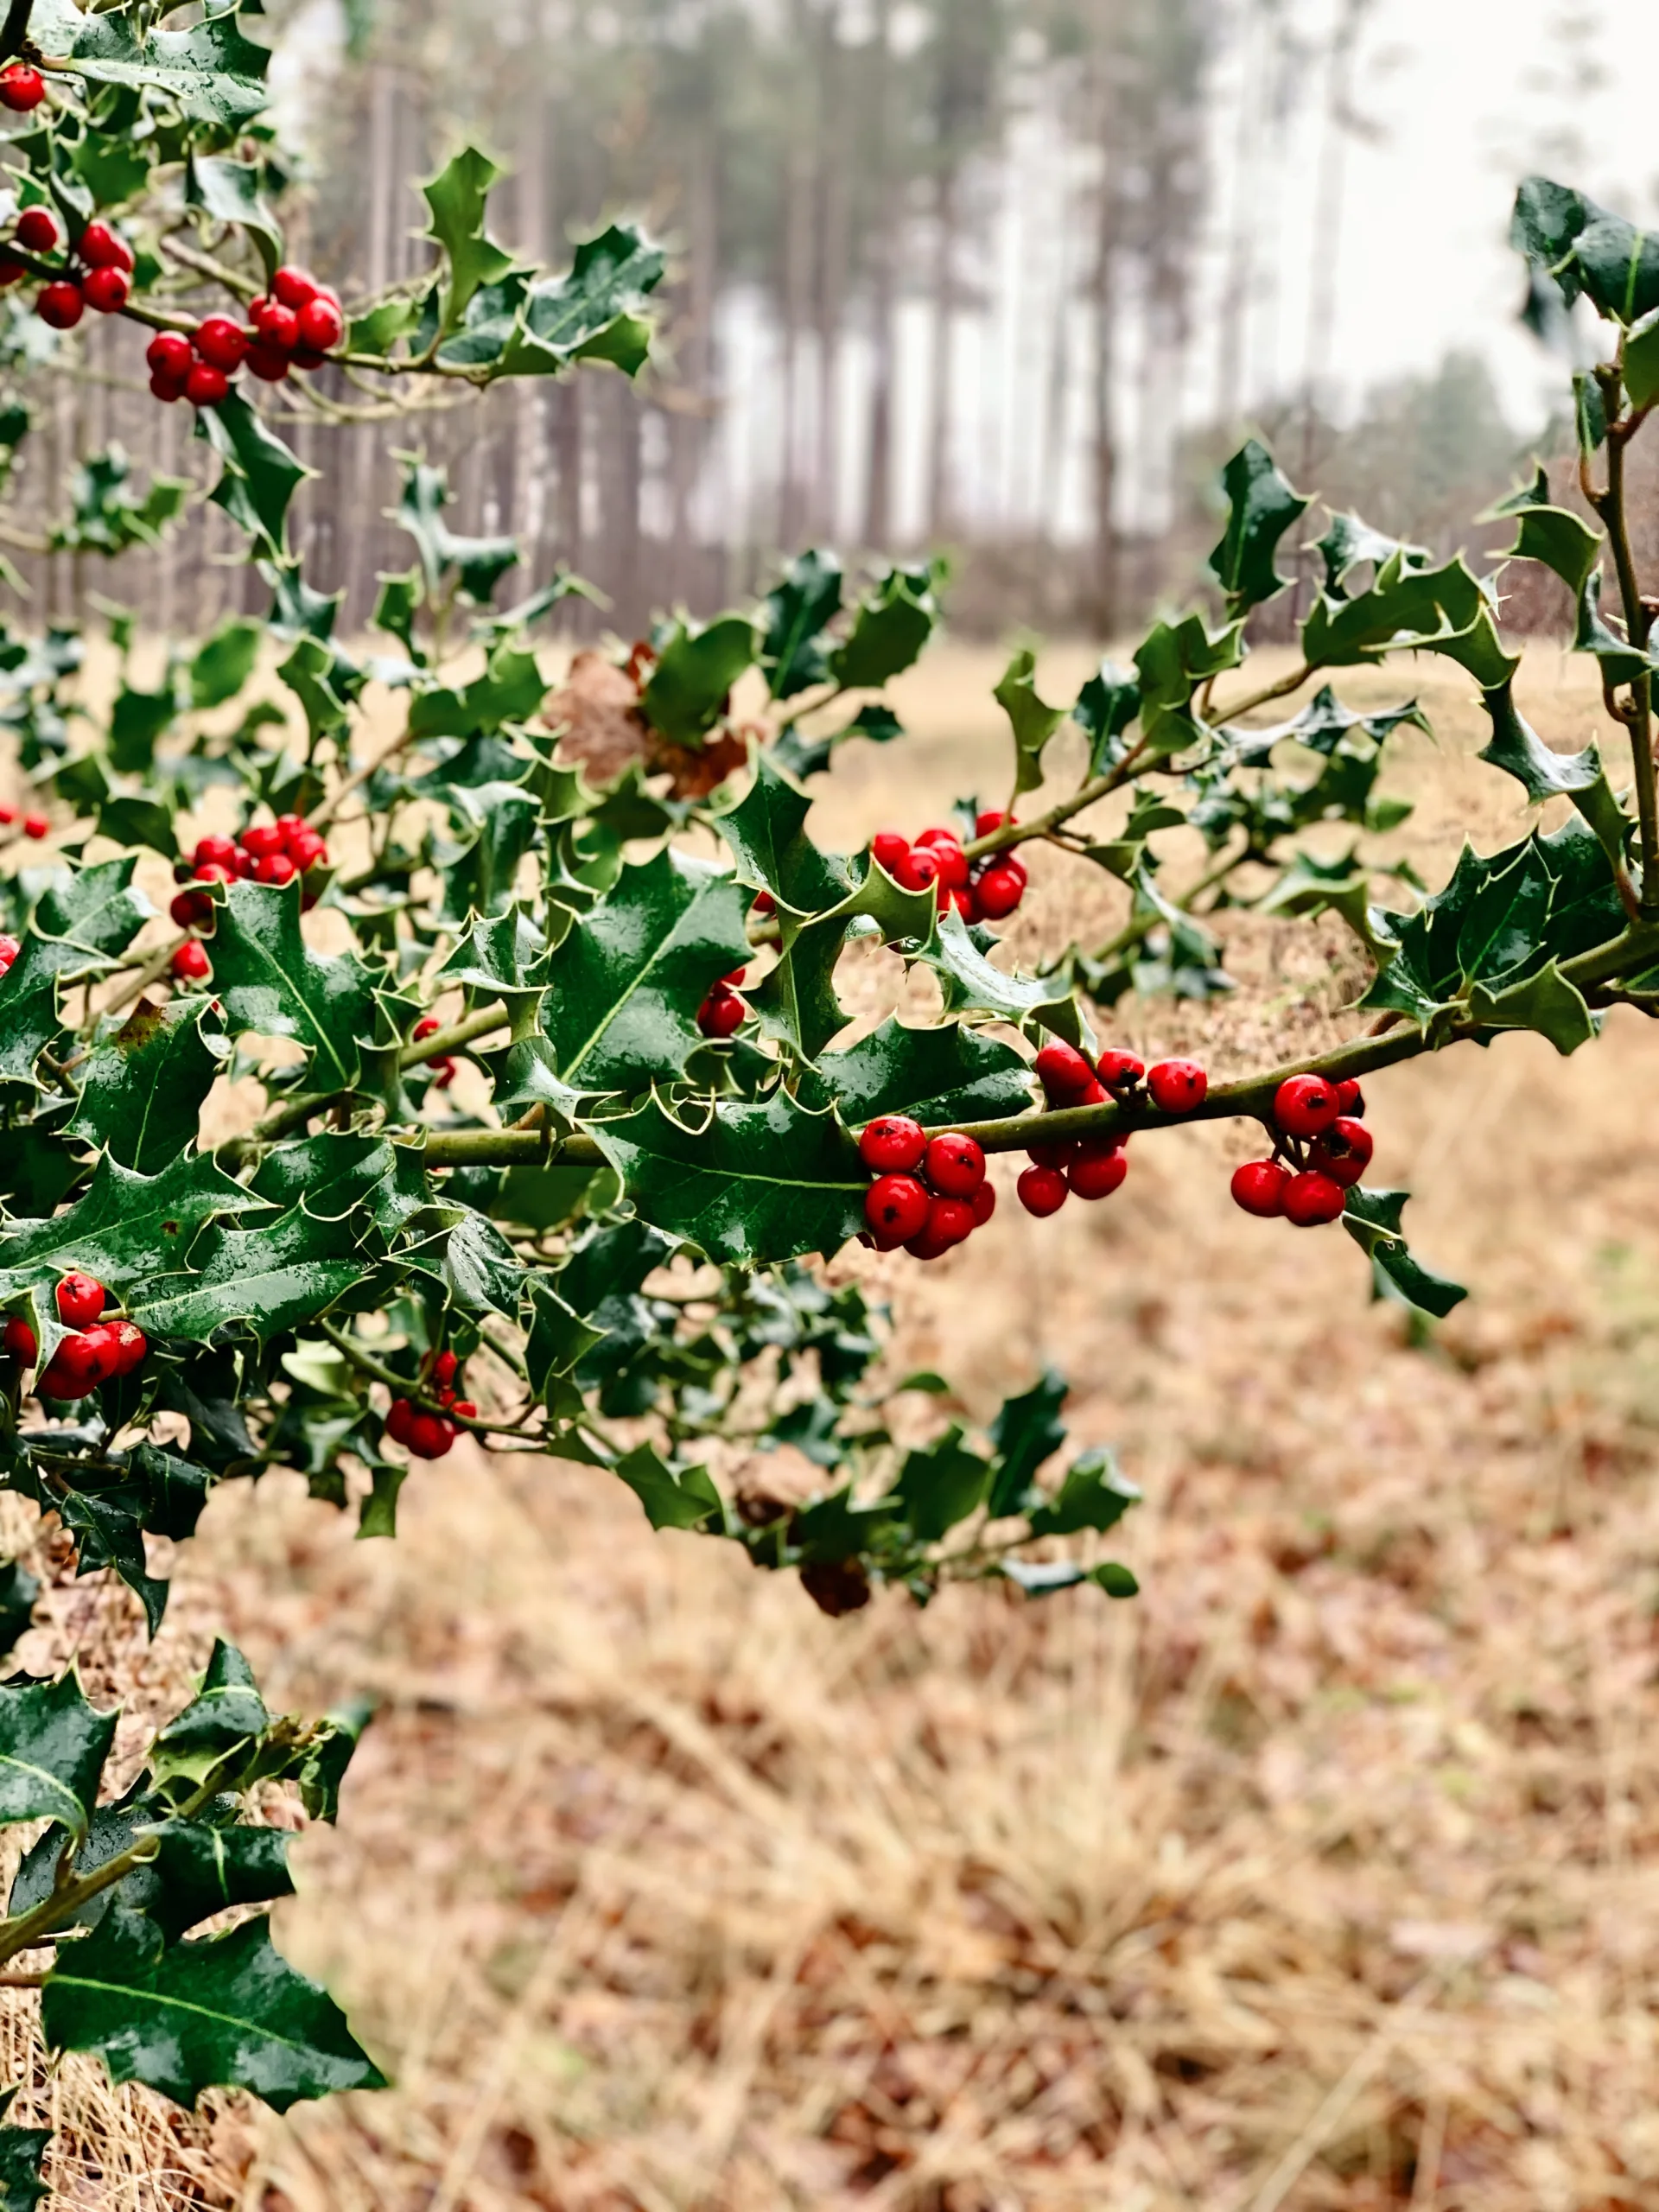 A close-up image of a holly branch with bright red berries and green leaves, with a blurred forest background